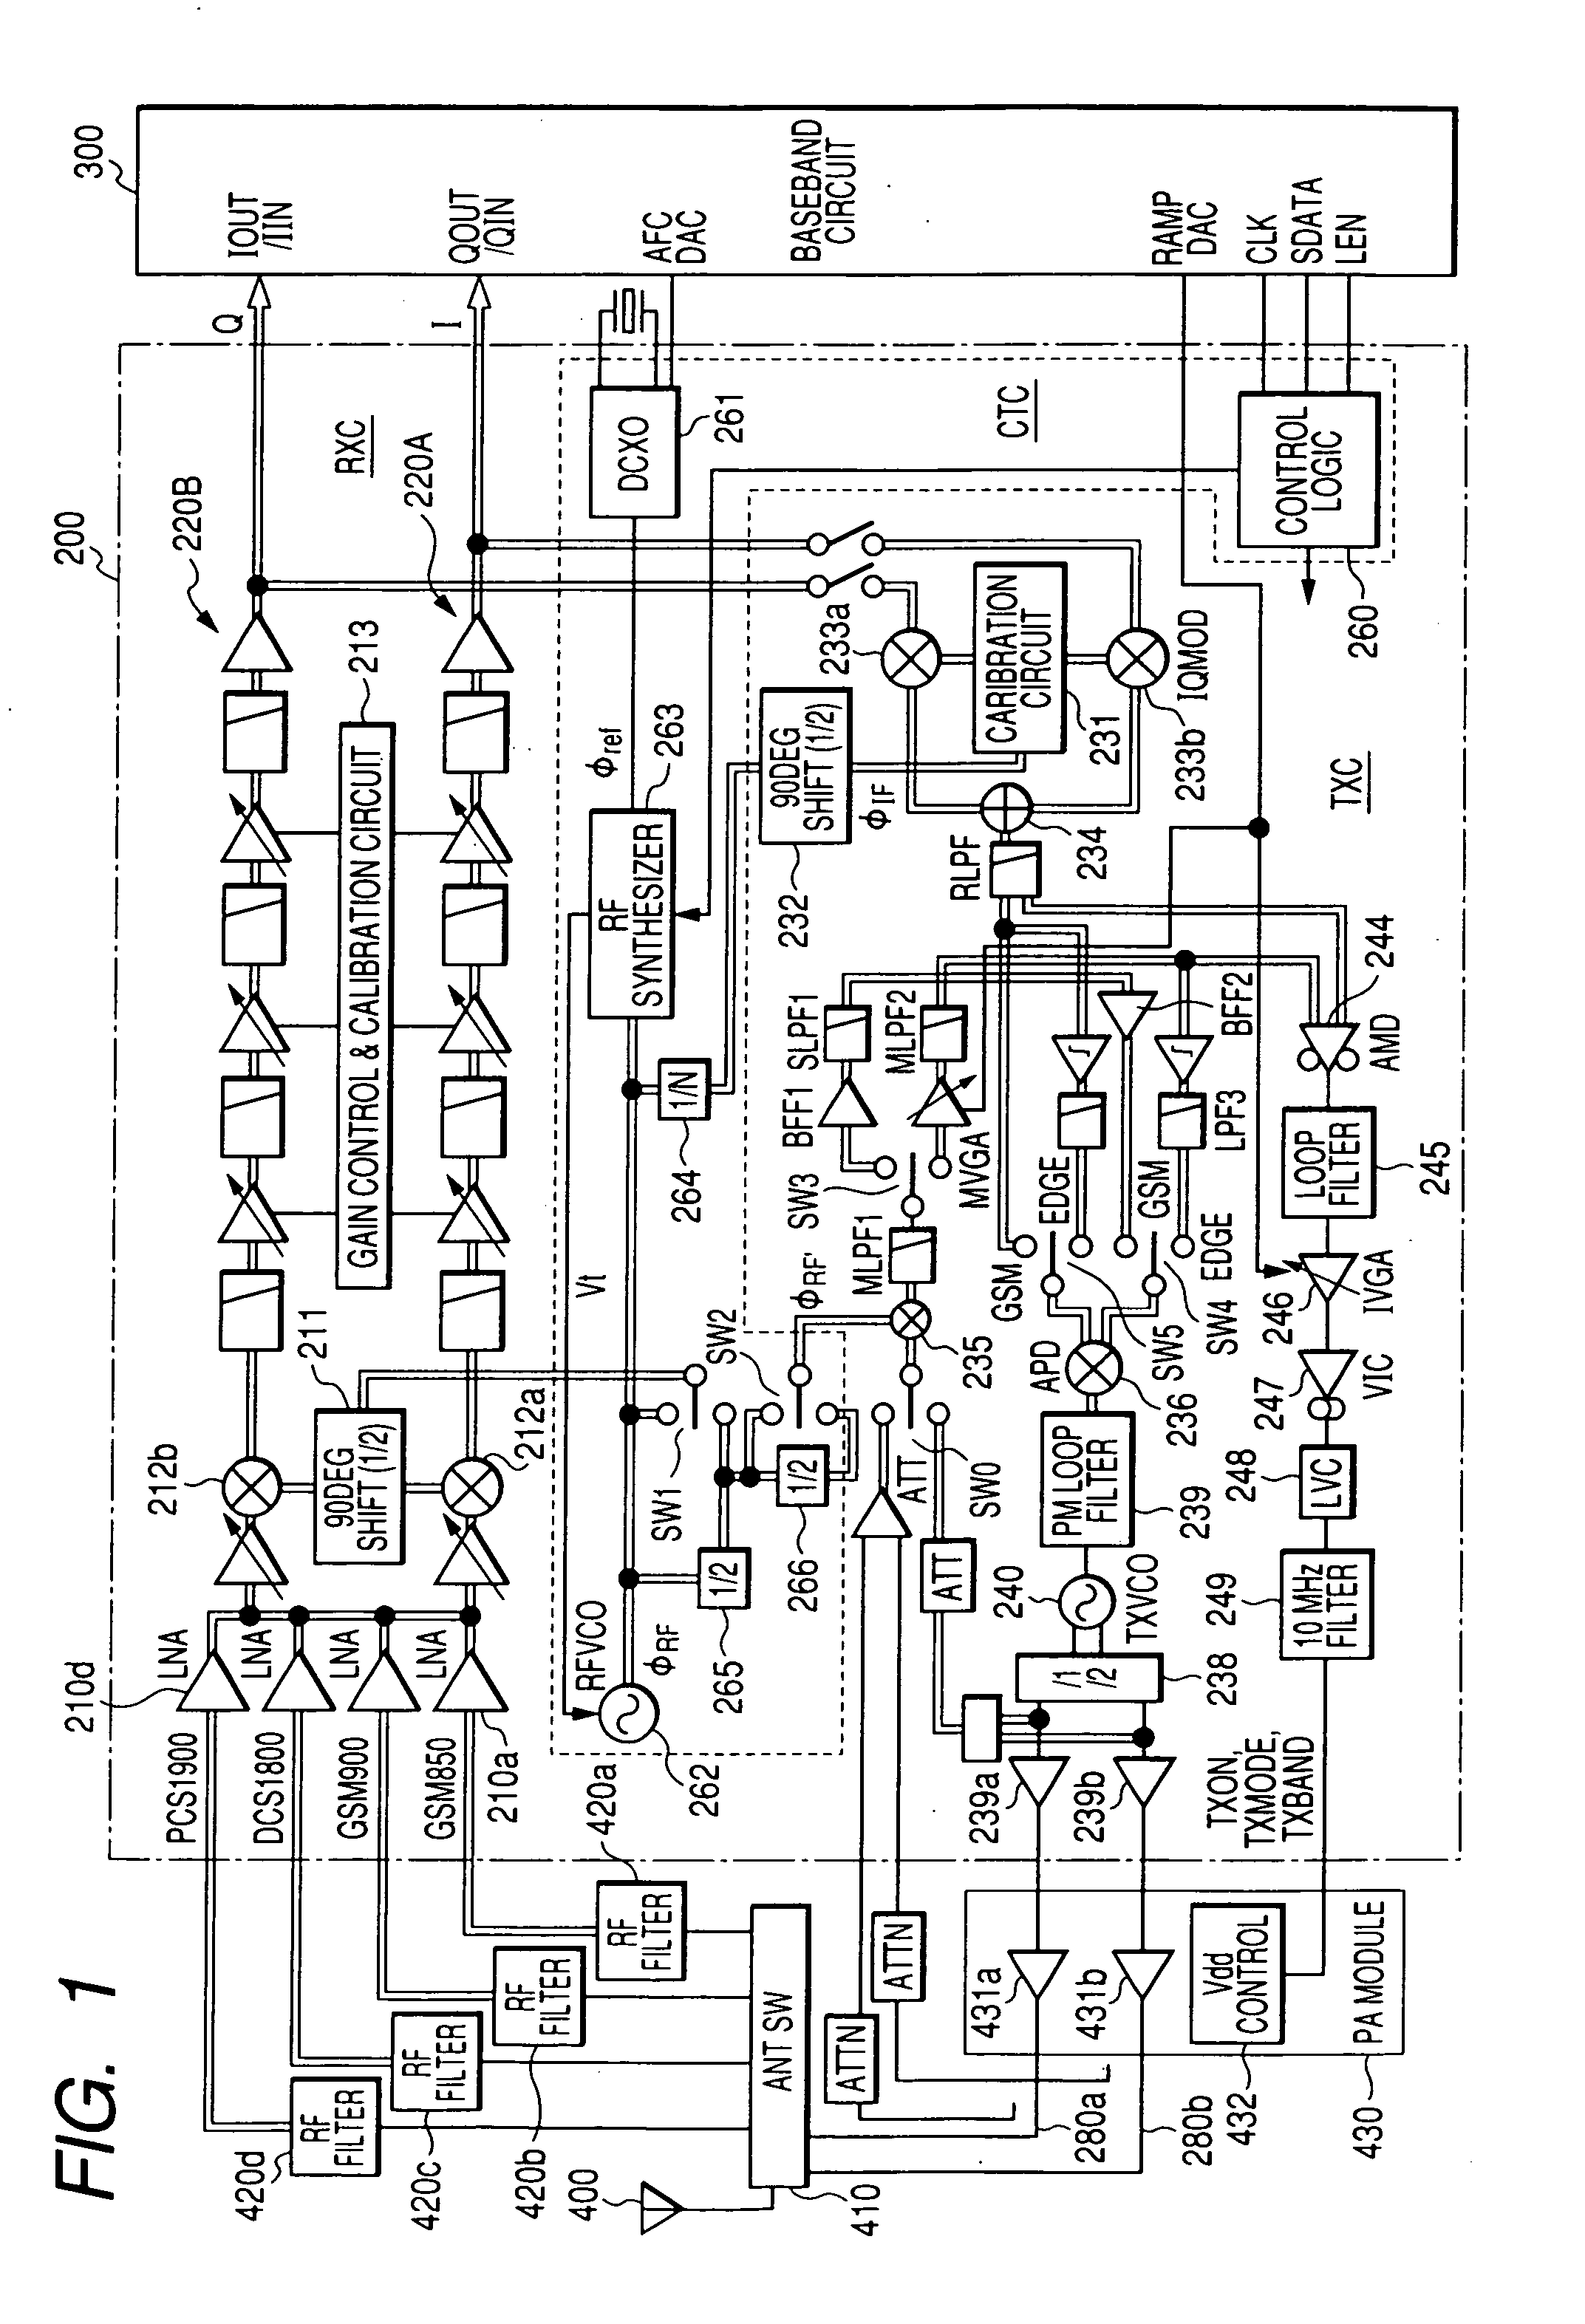 Semiconductor integrated circuit for communication